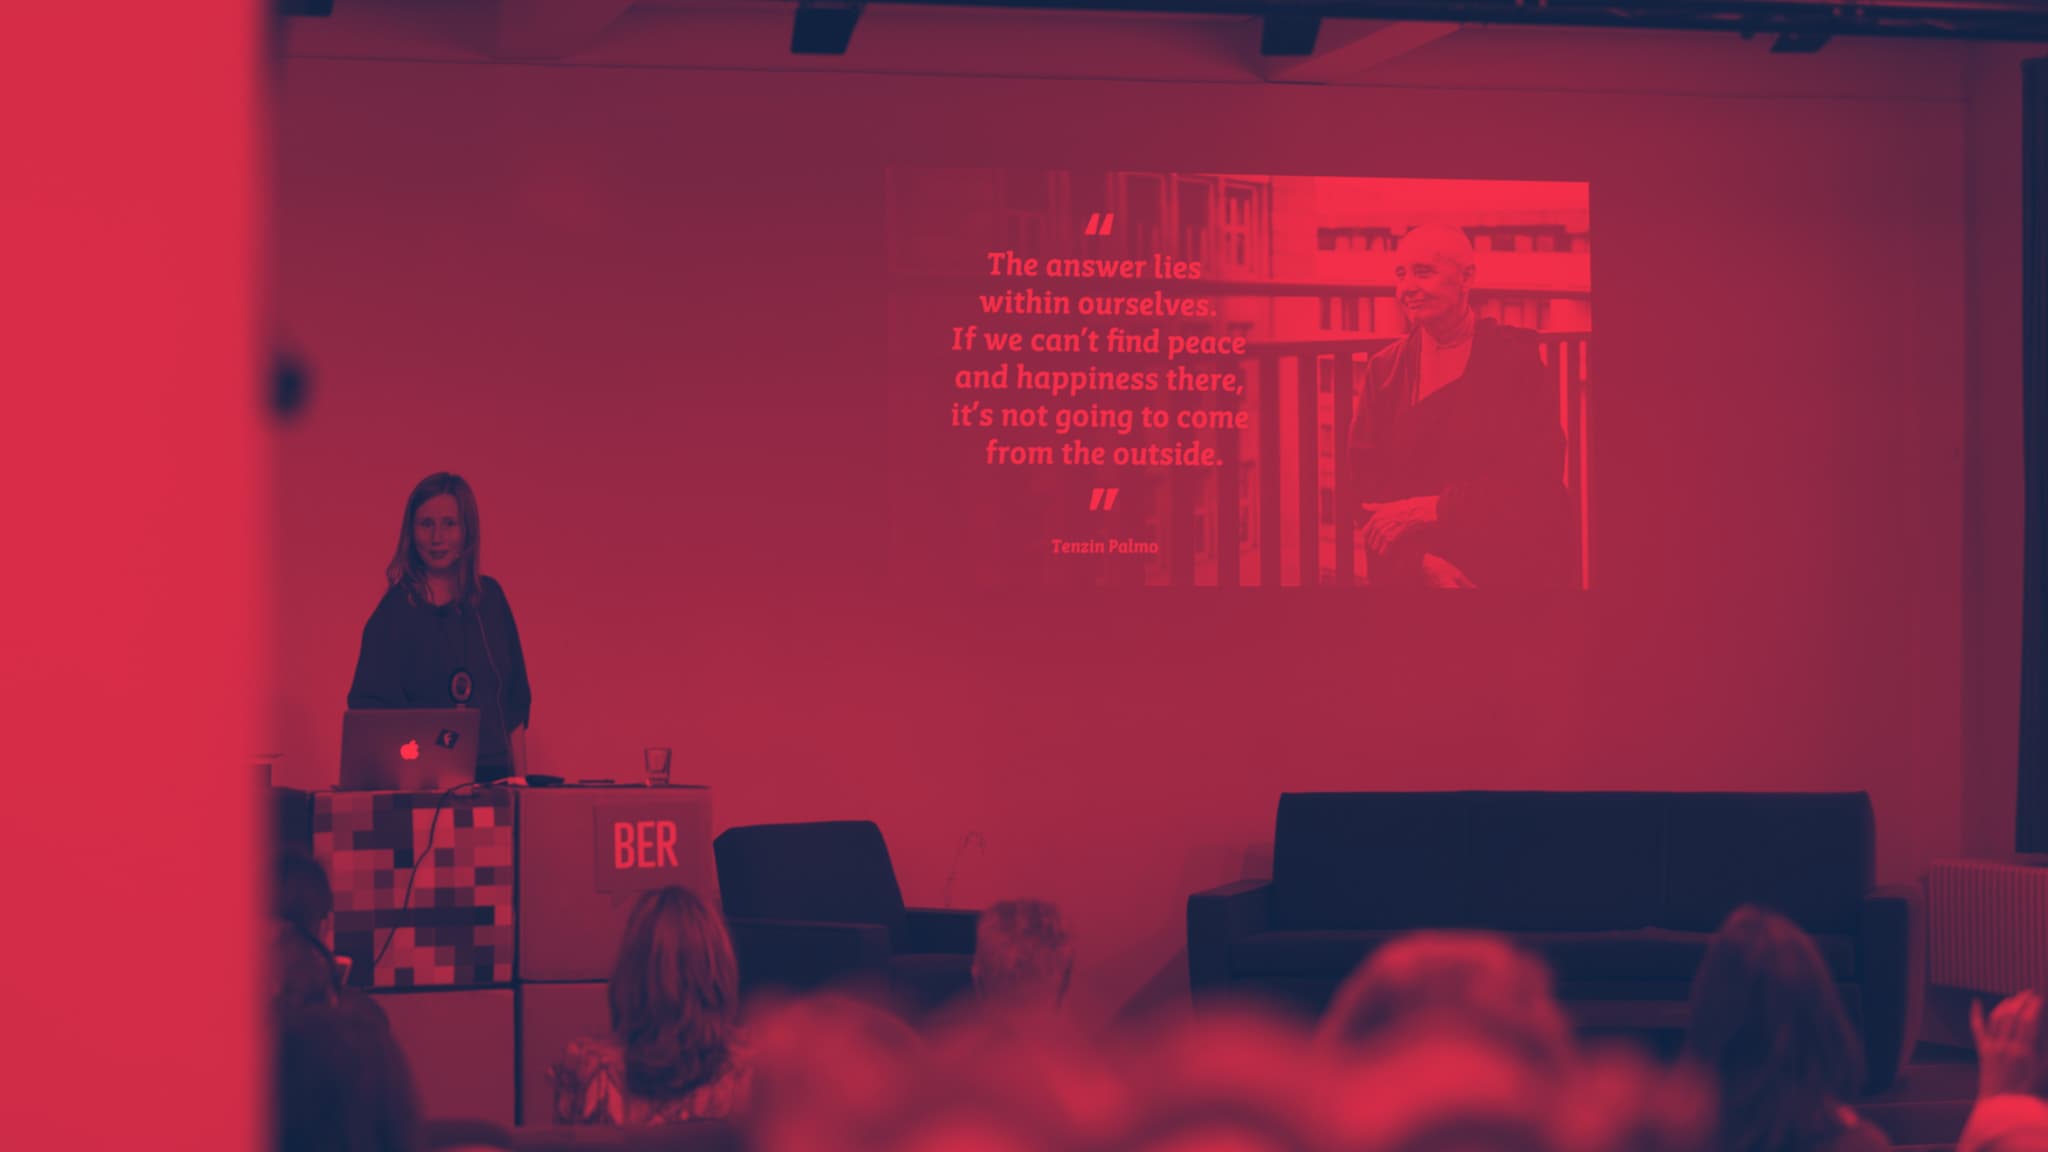 Presentation at Creative Mornings Berlin: quote by Tenzin Palmo